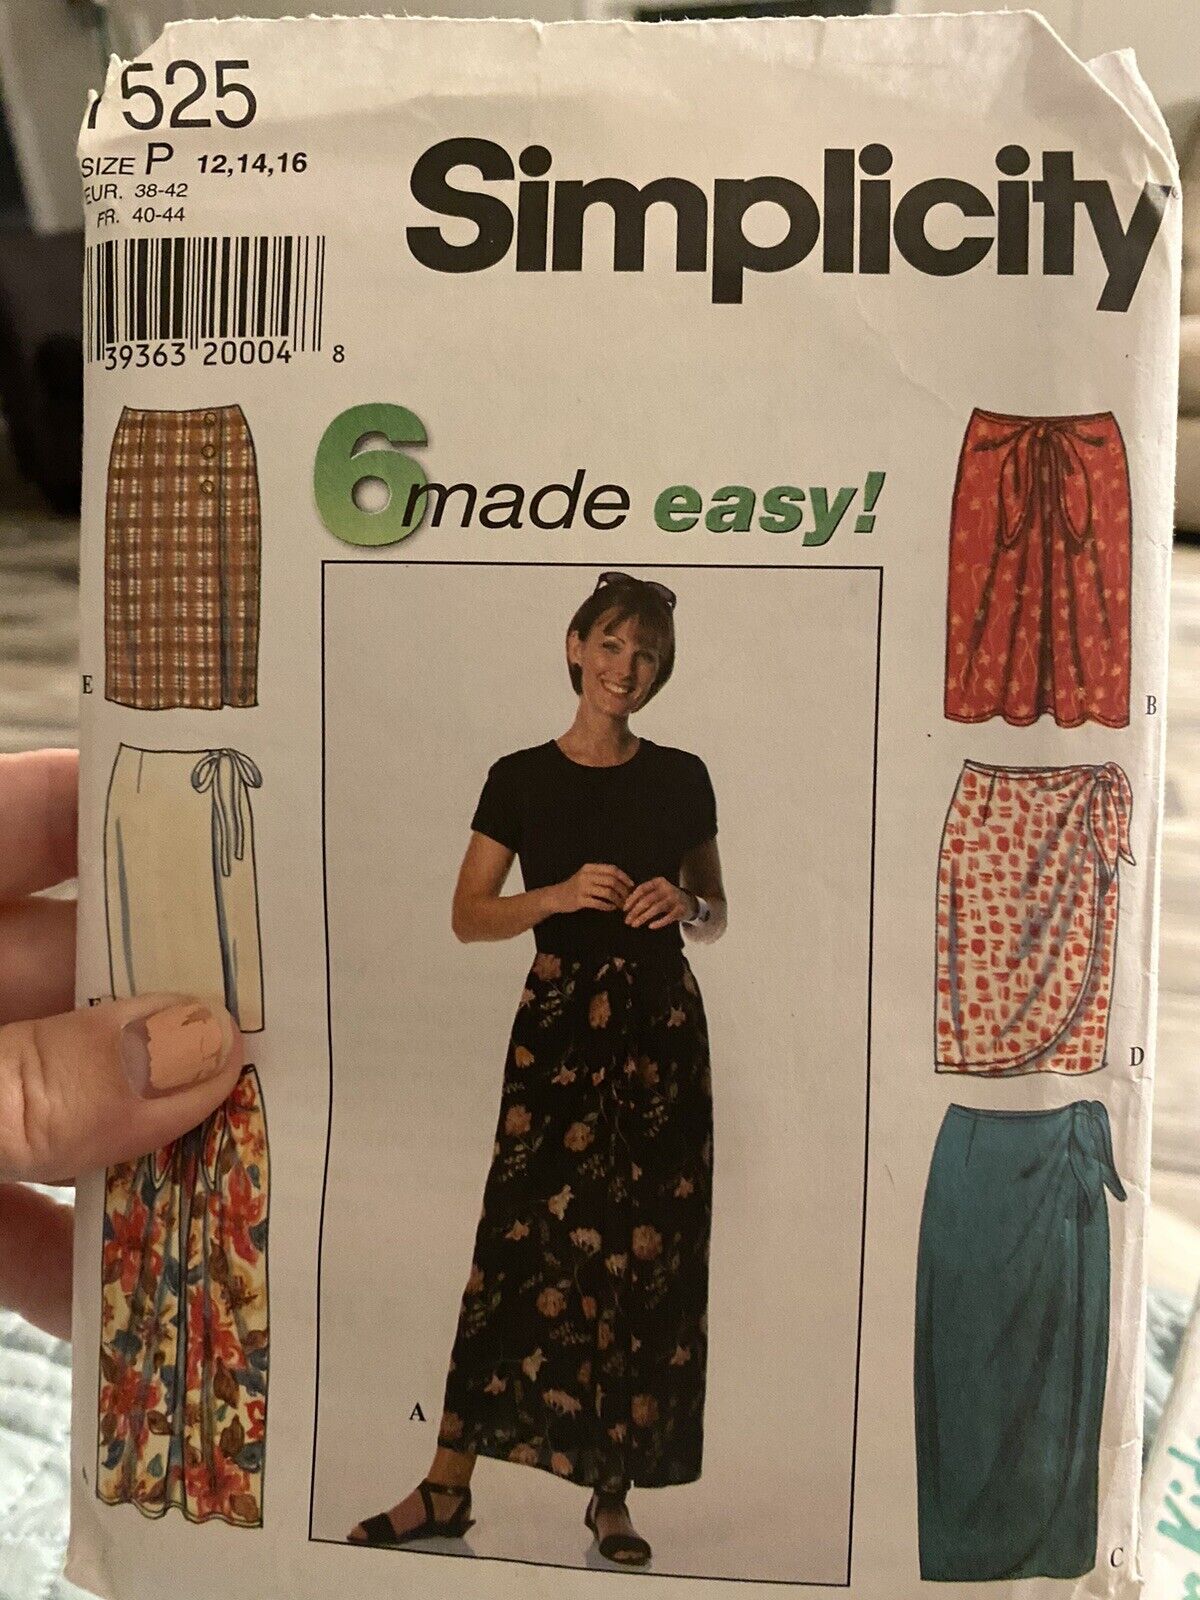 1997 Vintage Simplicity Sewing Pattern 7525 Size 12-16 Cut and Complete 